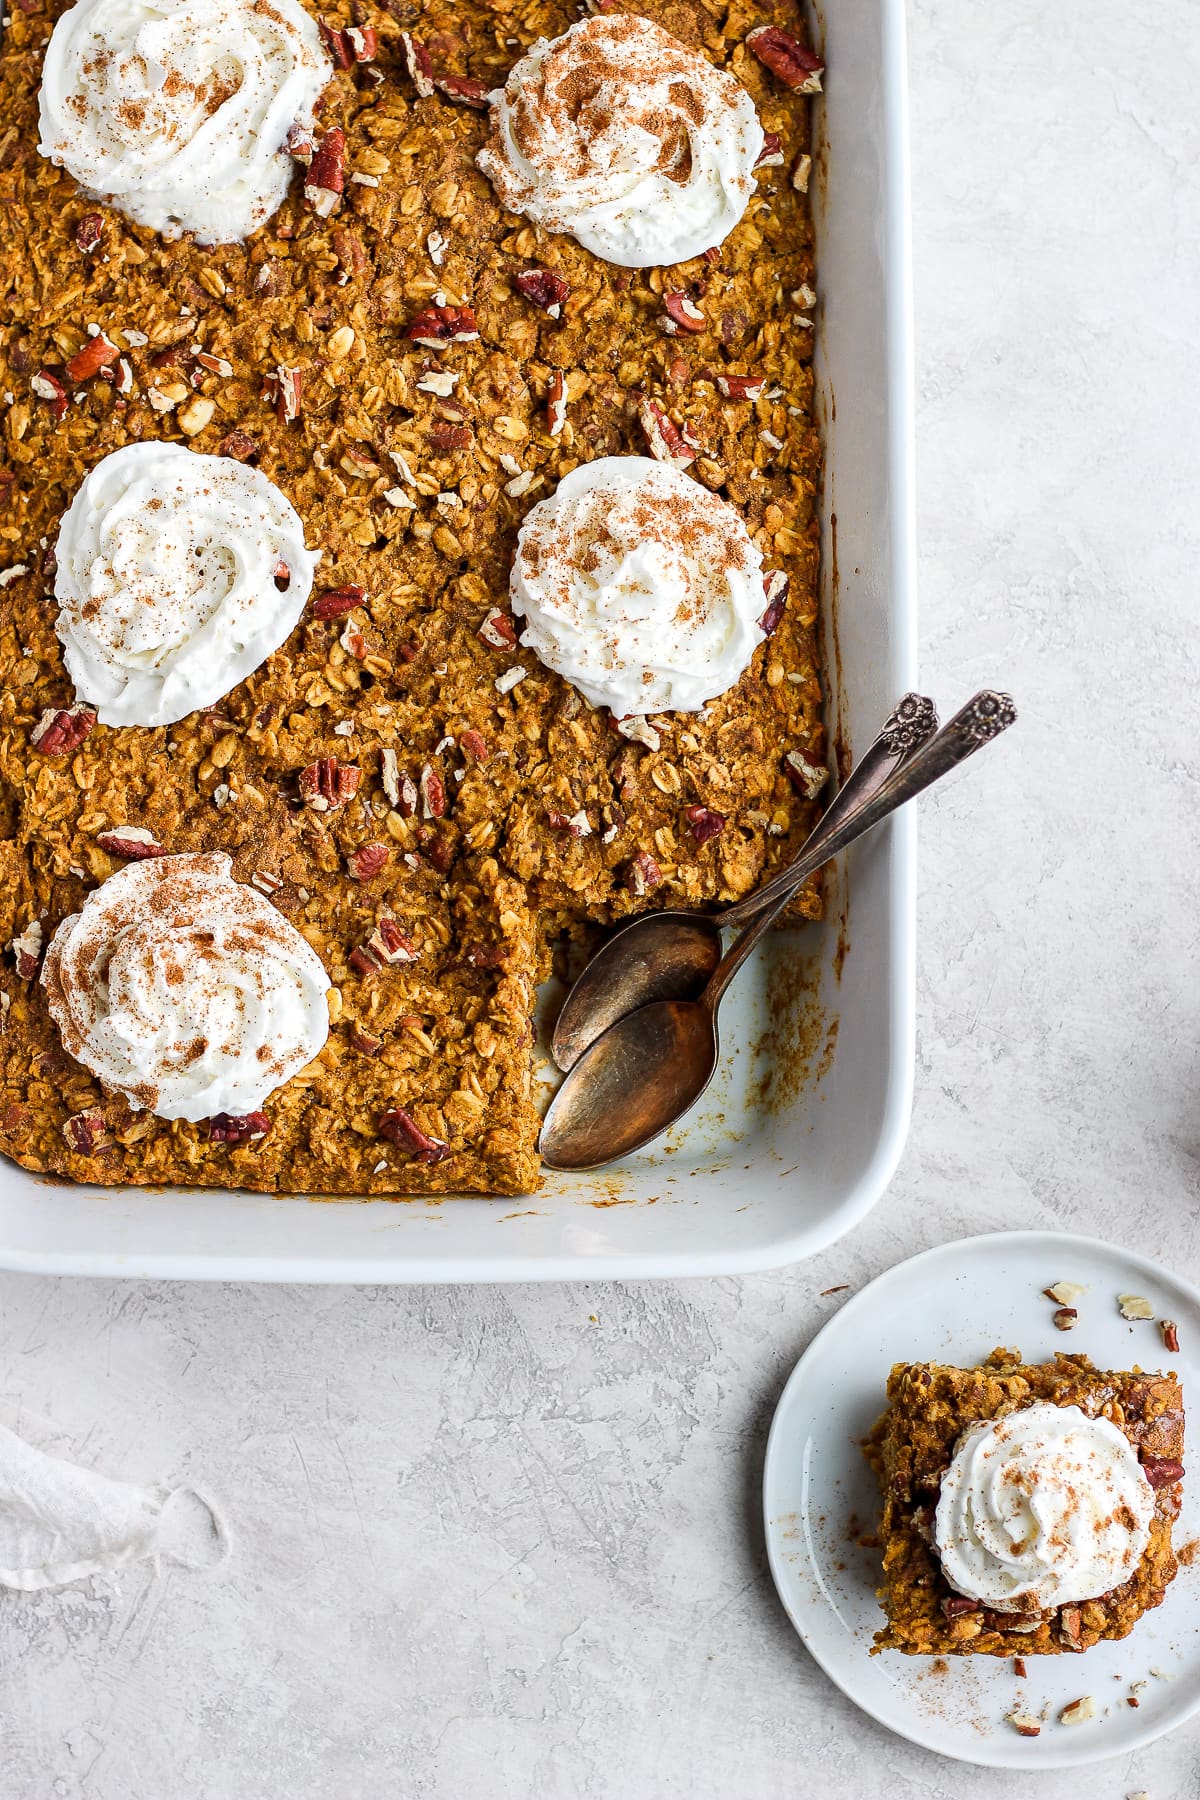 Pumpkin baked oatmeal in a white baking dish with one serving removed and placed on a plate.